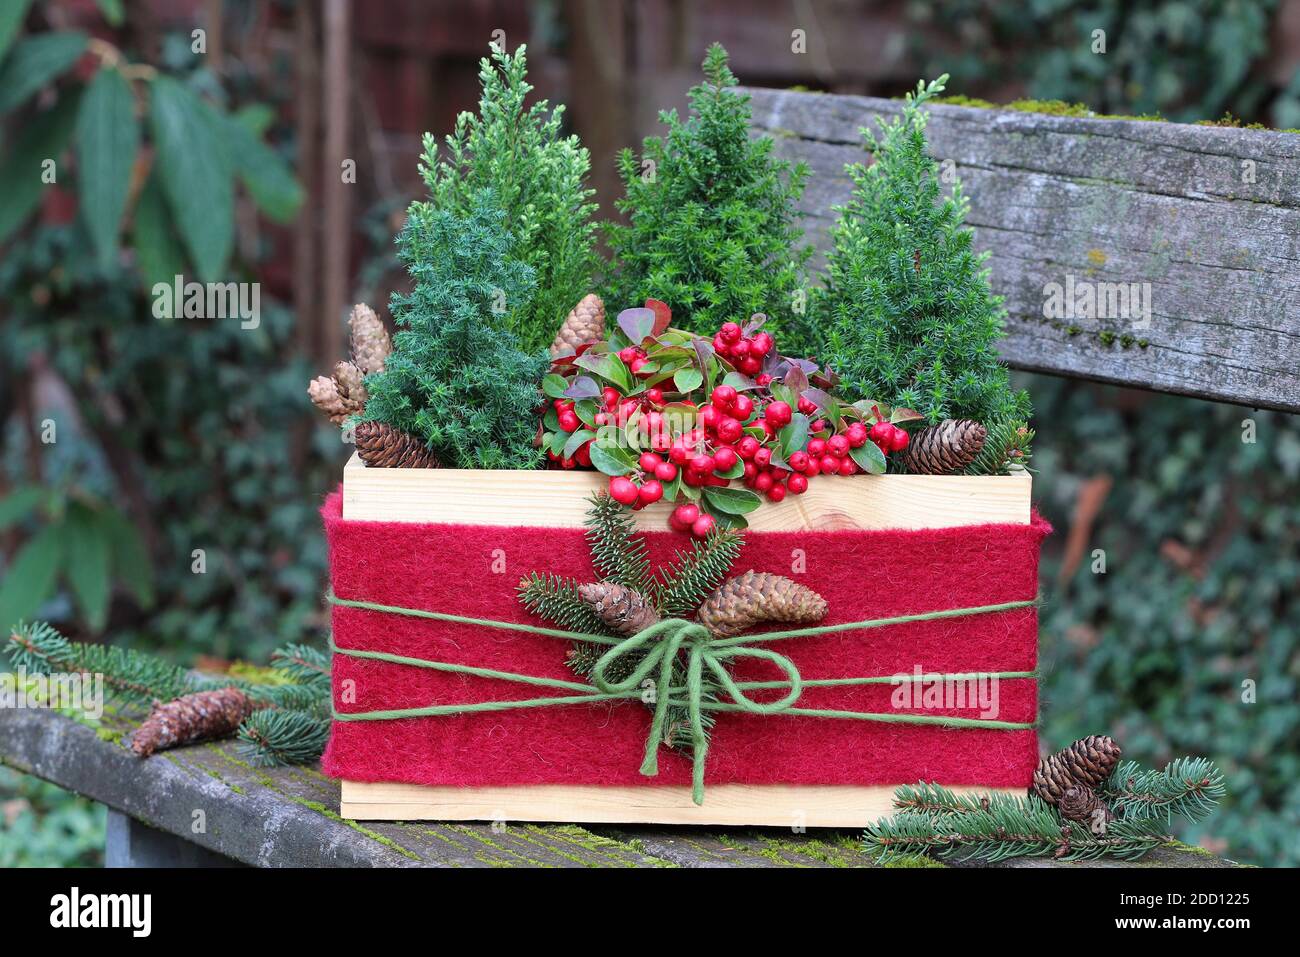 gaultheria procumbens and coniferous in wooden box as winter garden decoration Stock Photo